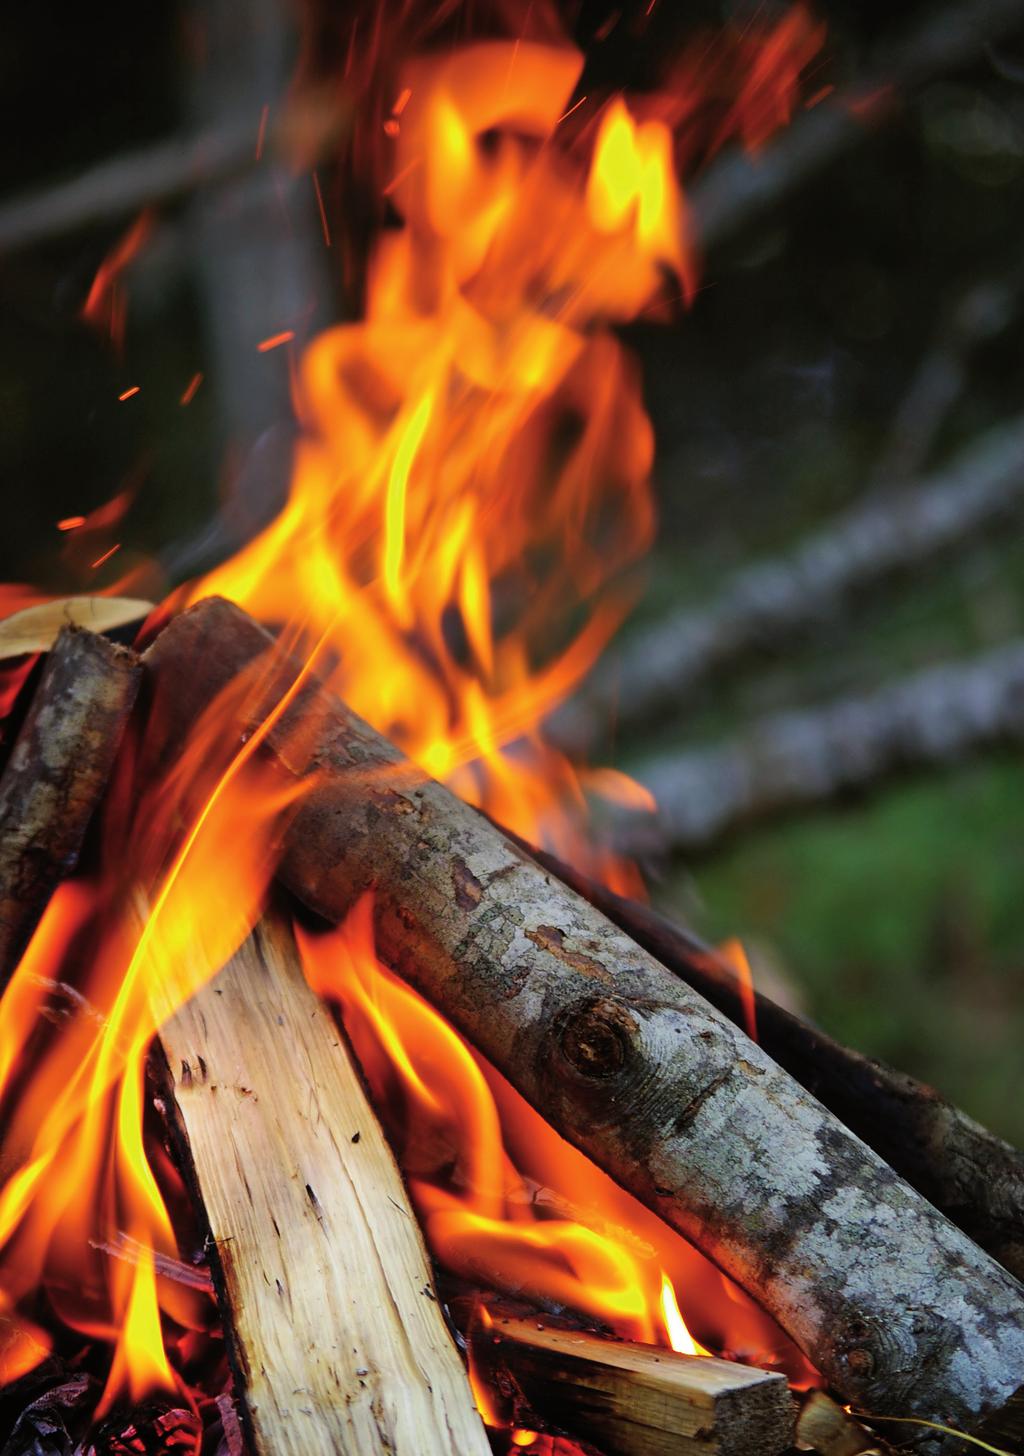 Did you know? A fire can destroy a tent in less than 60 seconds. In England, on average 27,000 fires are started on grass, heathland and moorland every year. This is an average of 73 fires every day!